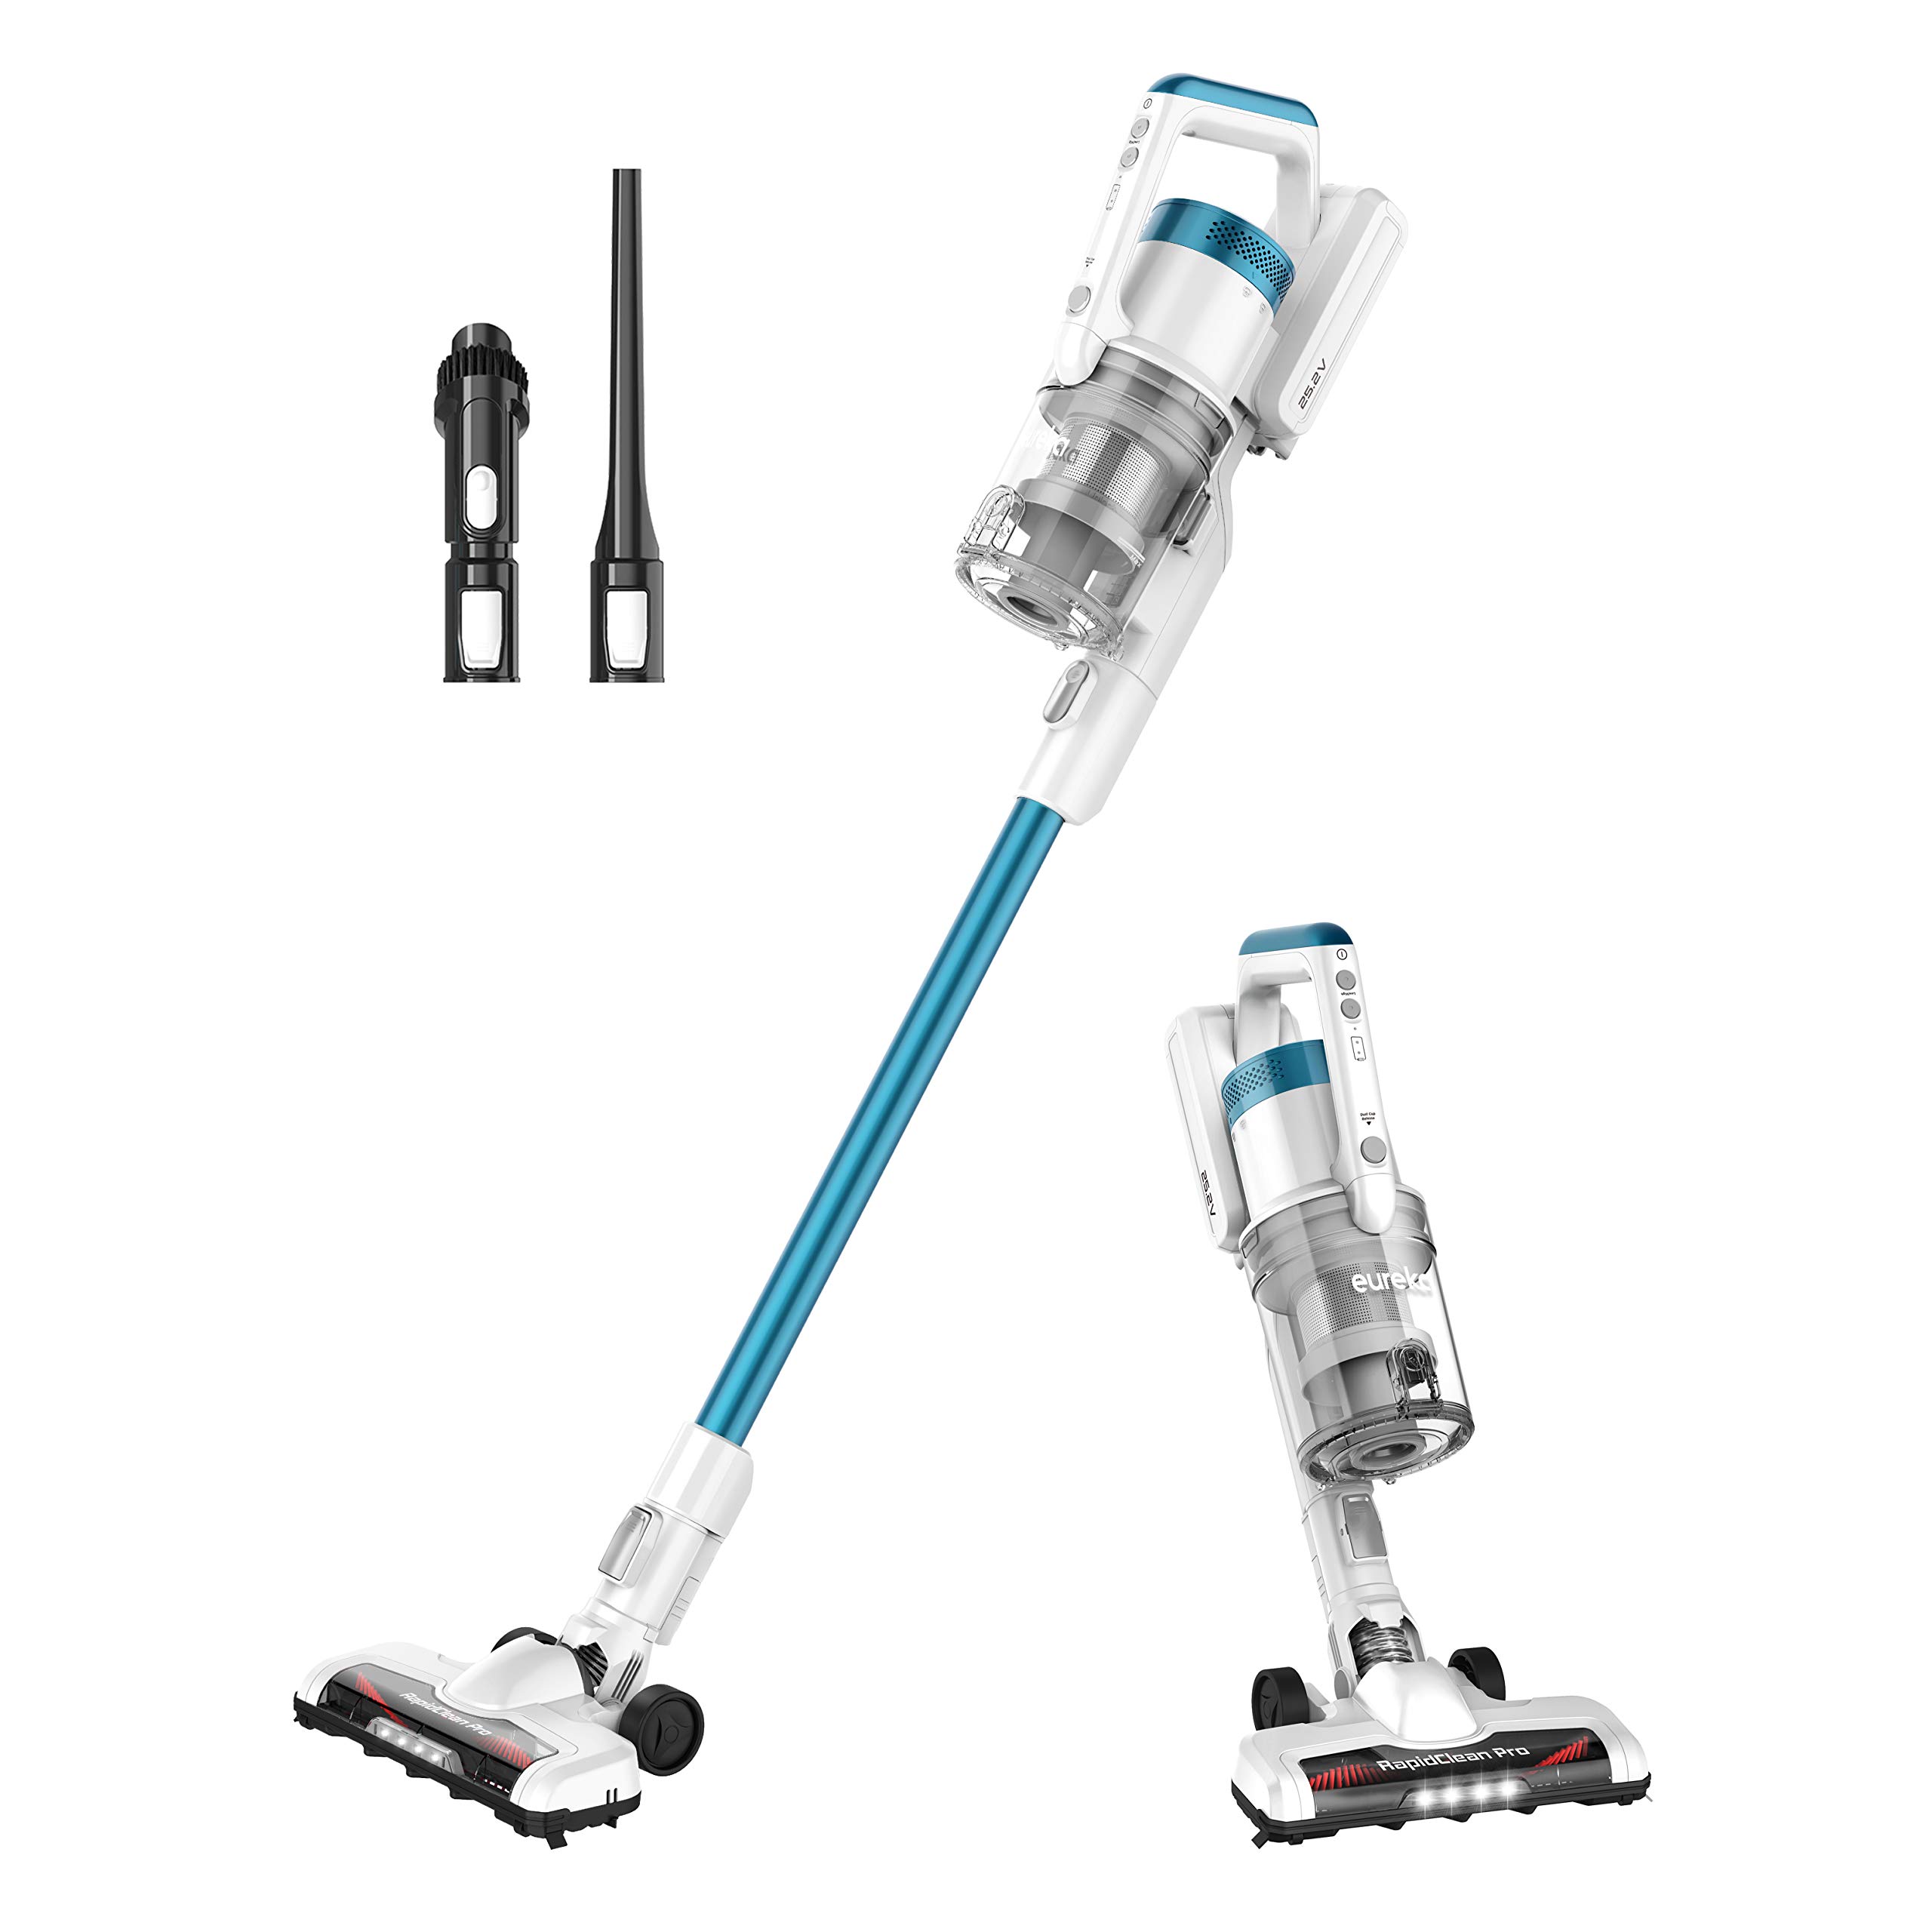 Cordless vacuum cleaners: how to find the best one for you